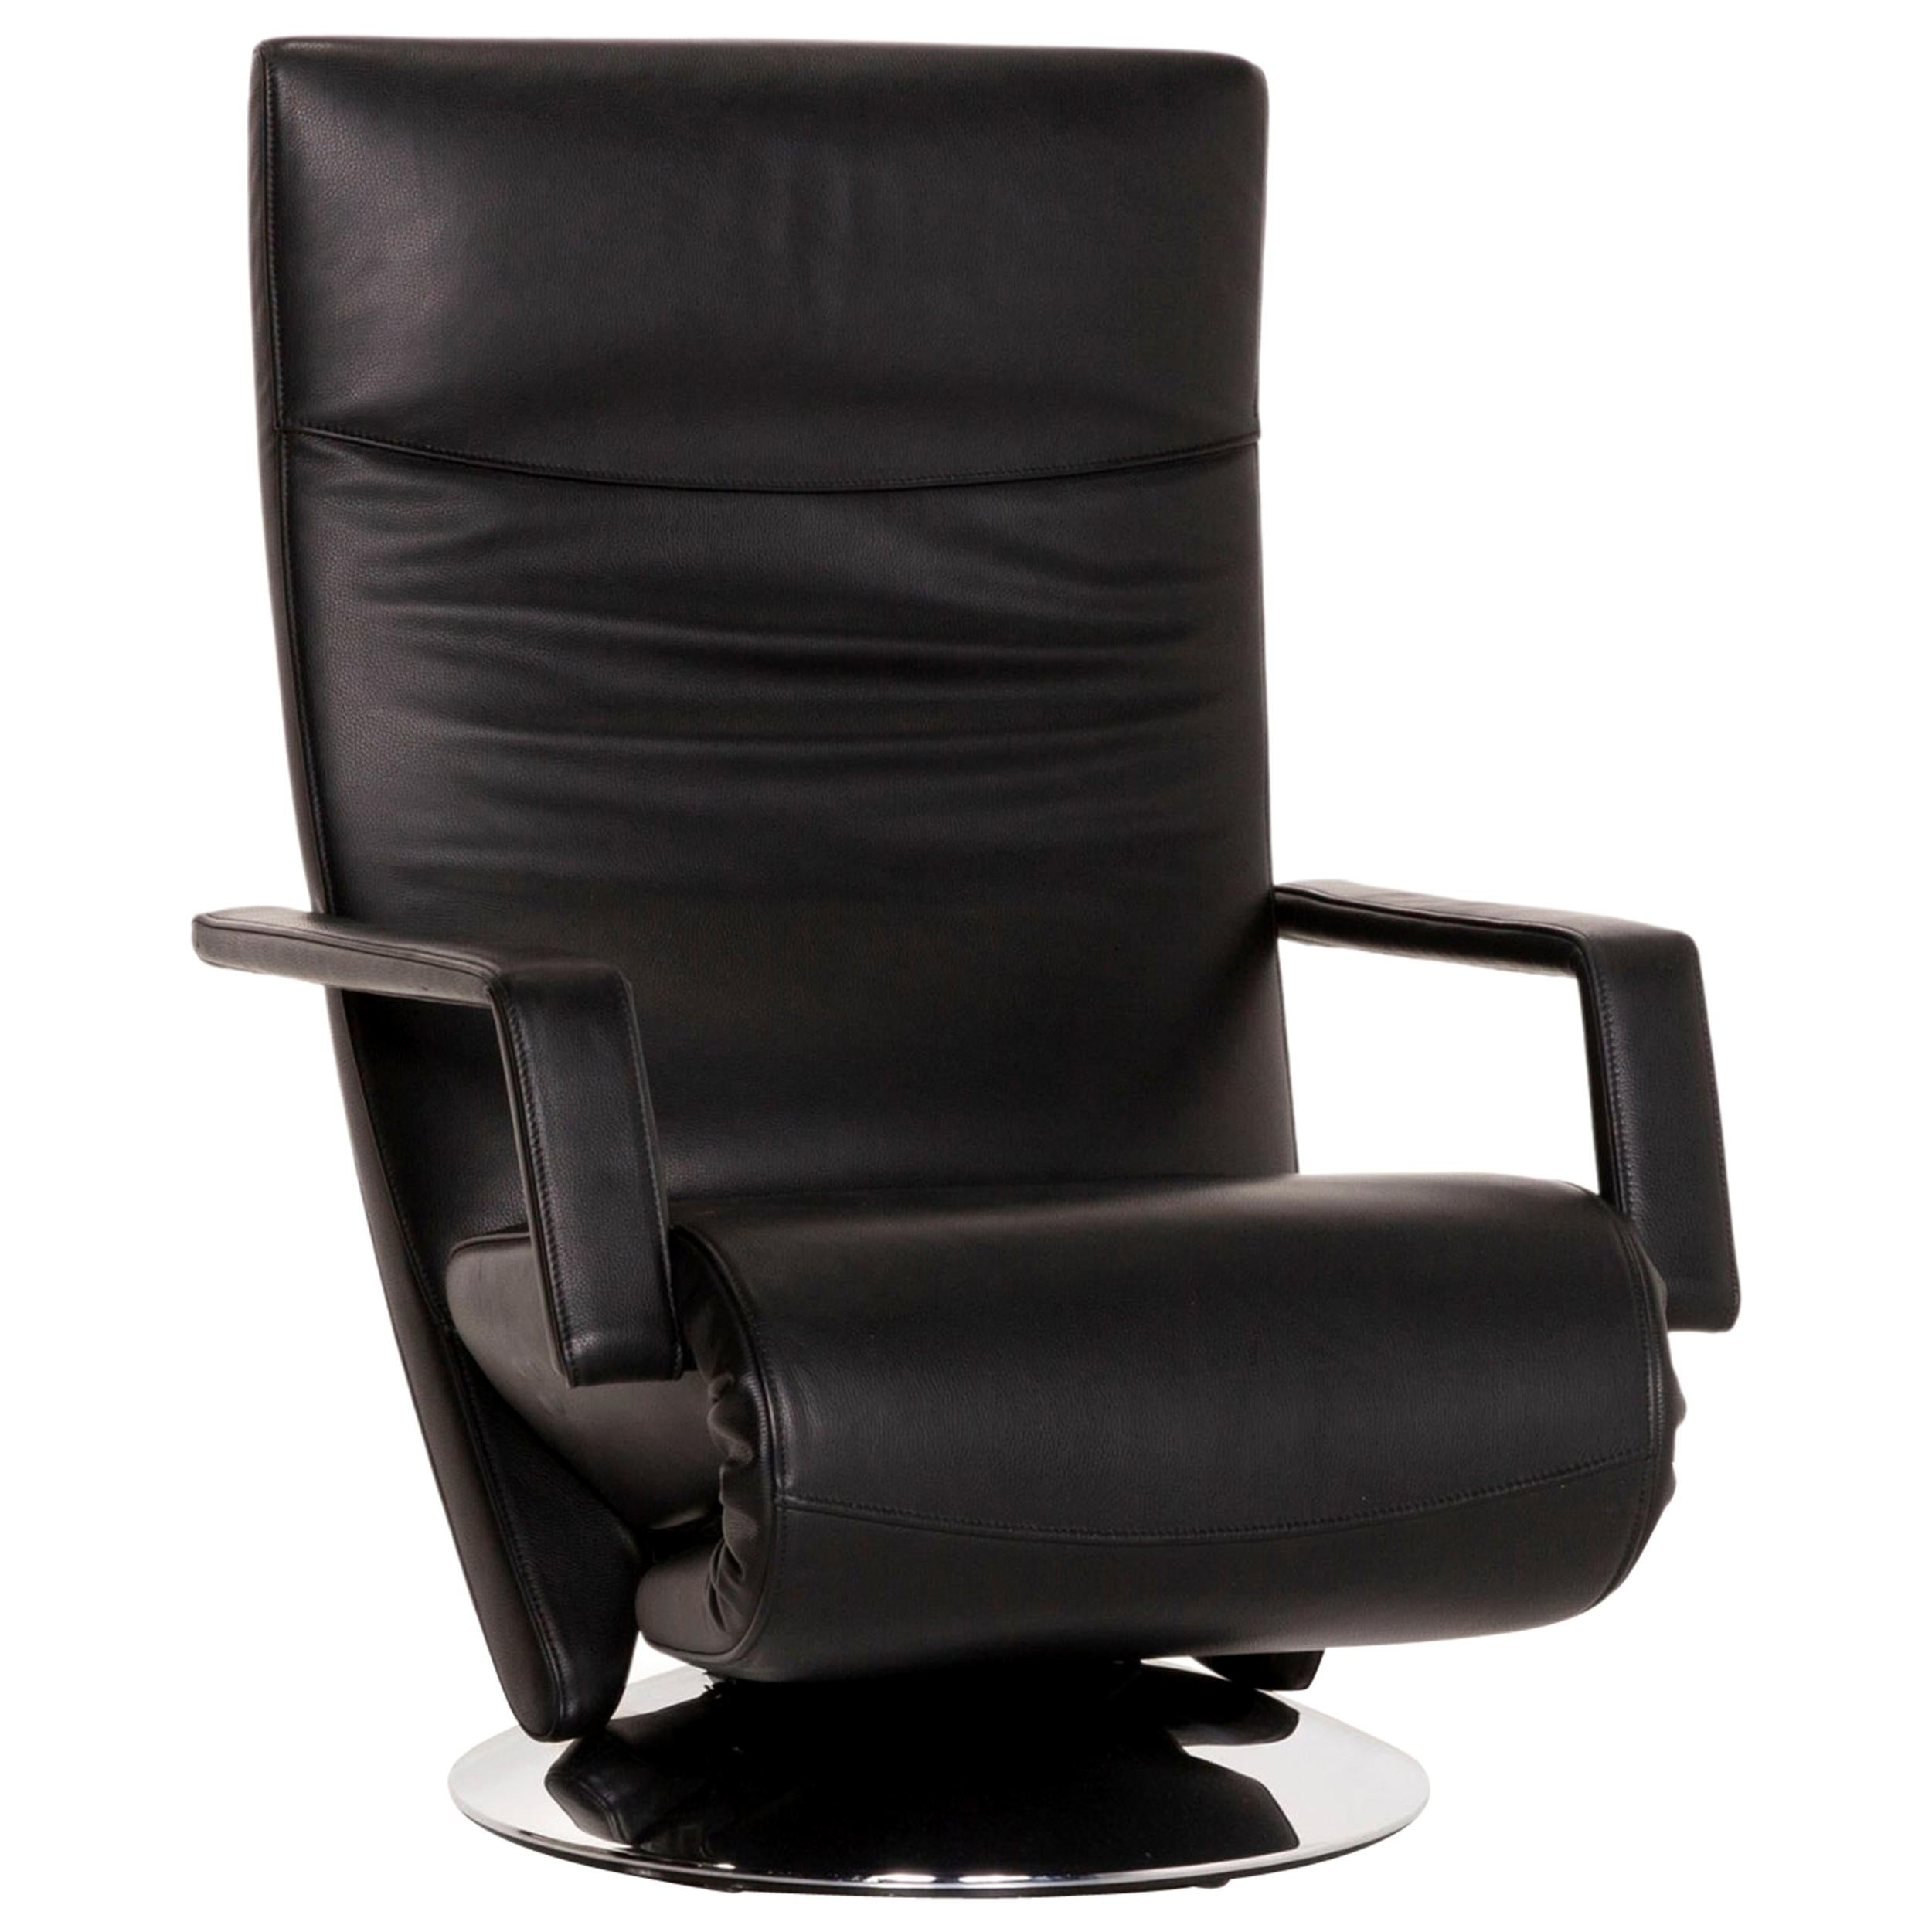 Fsm Evolo Leather Armchair Black Electrical Function Relax Function Recliner